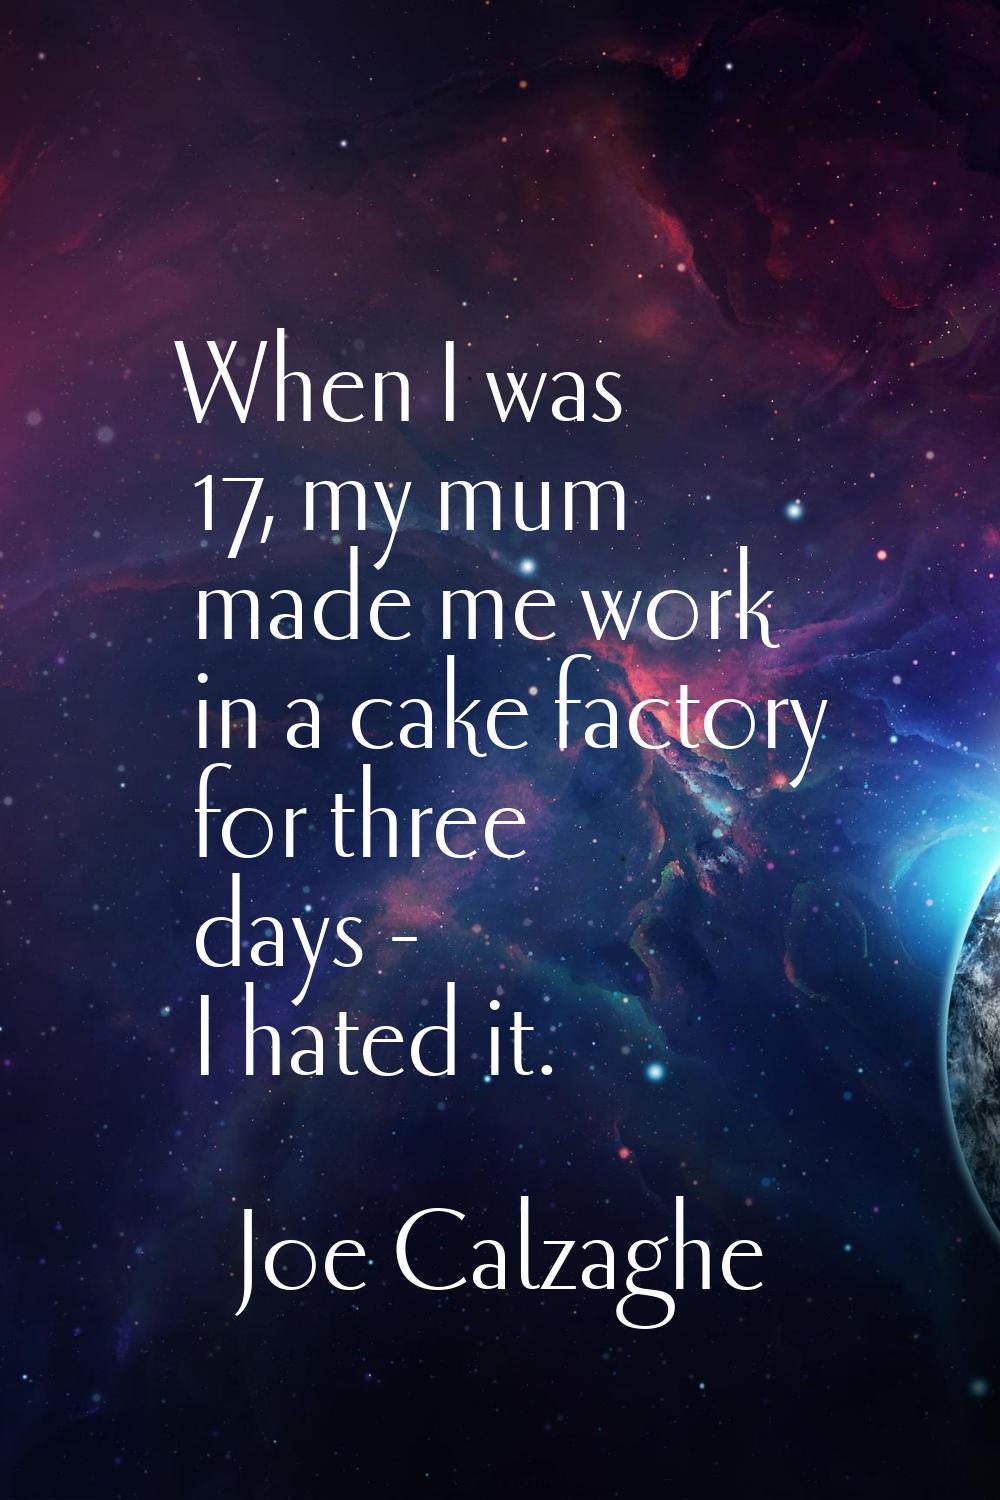 When I was 17, my mum made me work in a cake factory for three days - I hated it.